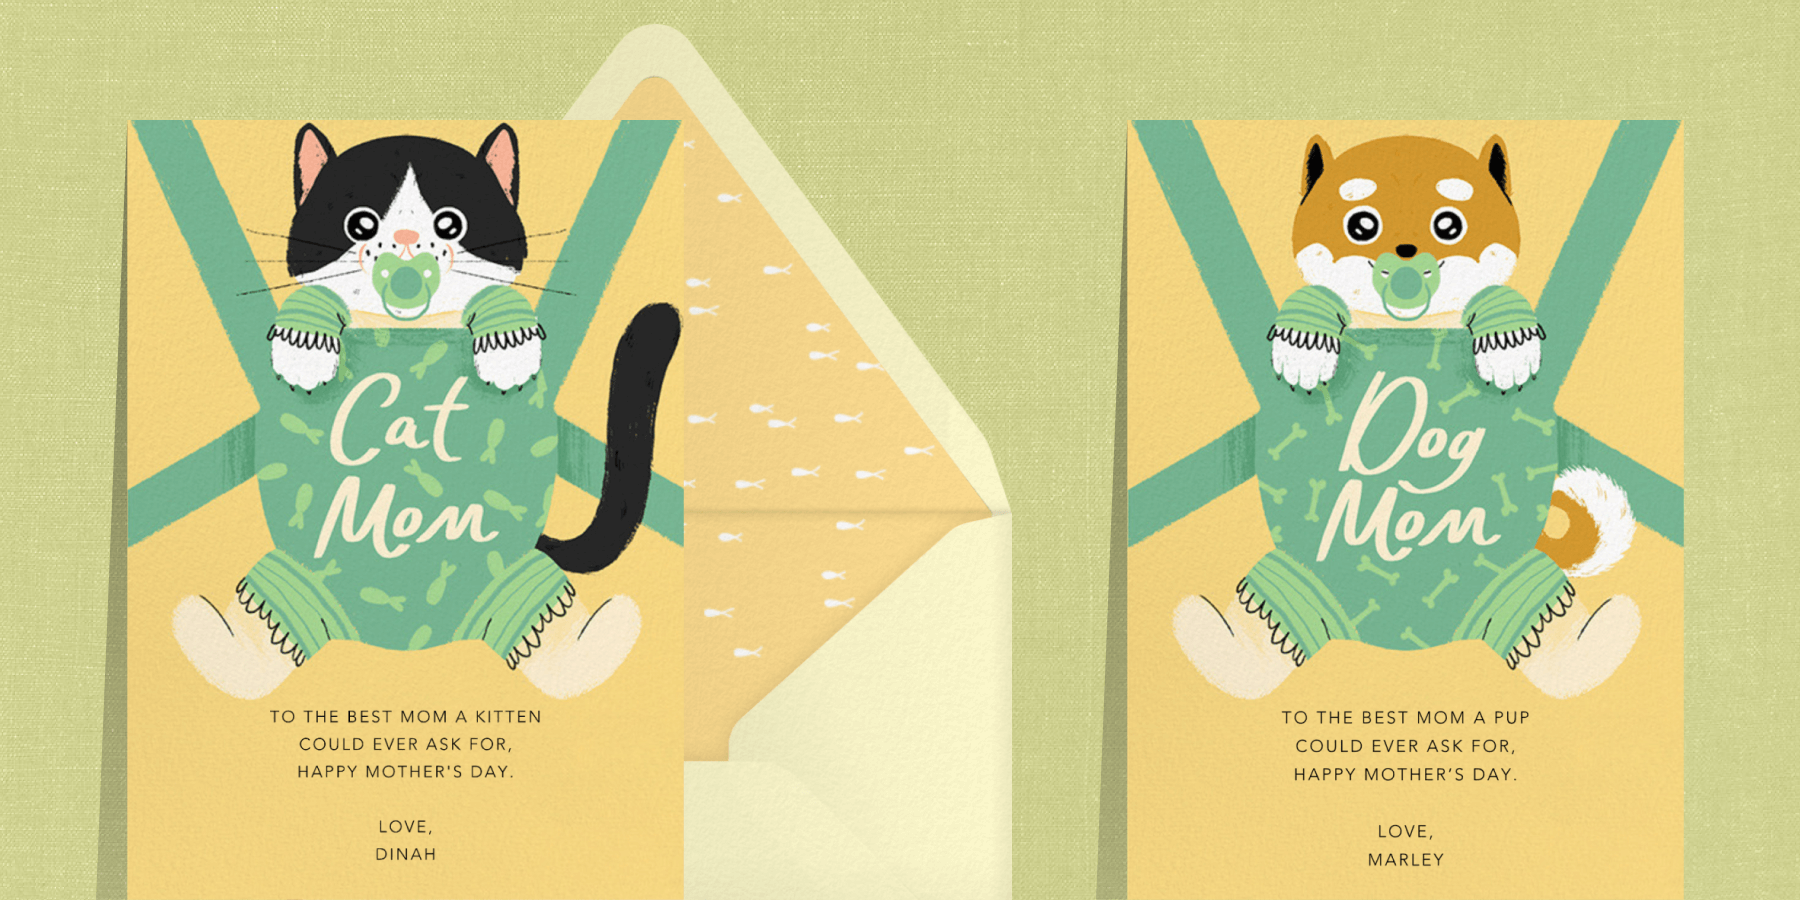 Two illustrated Mother’s Day cards featuring a cat in a baby carrier and a dog in a baby carrier.